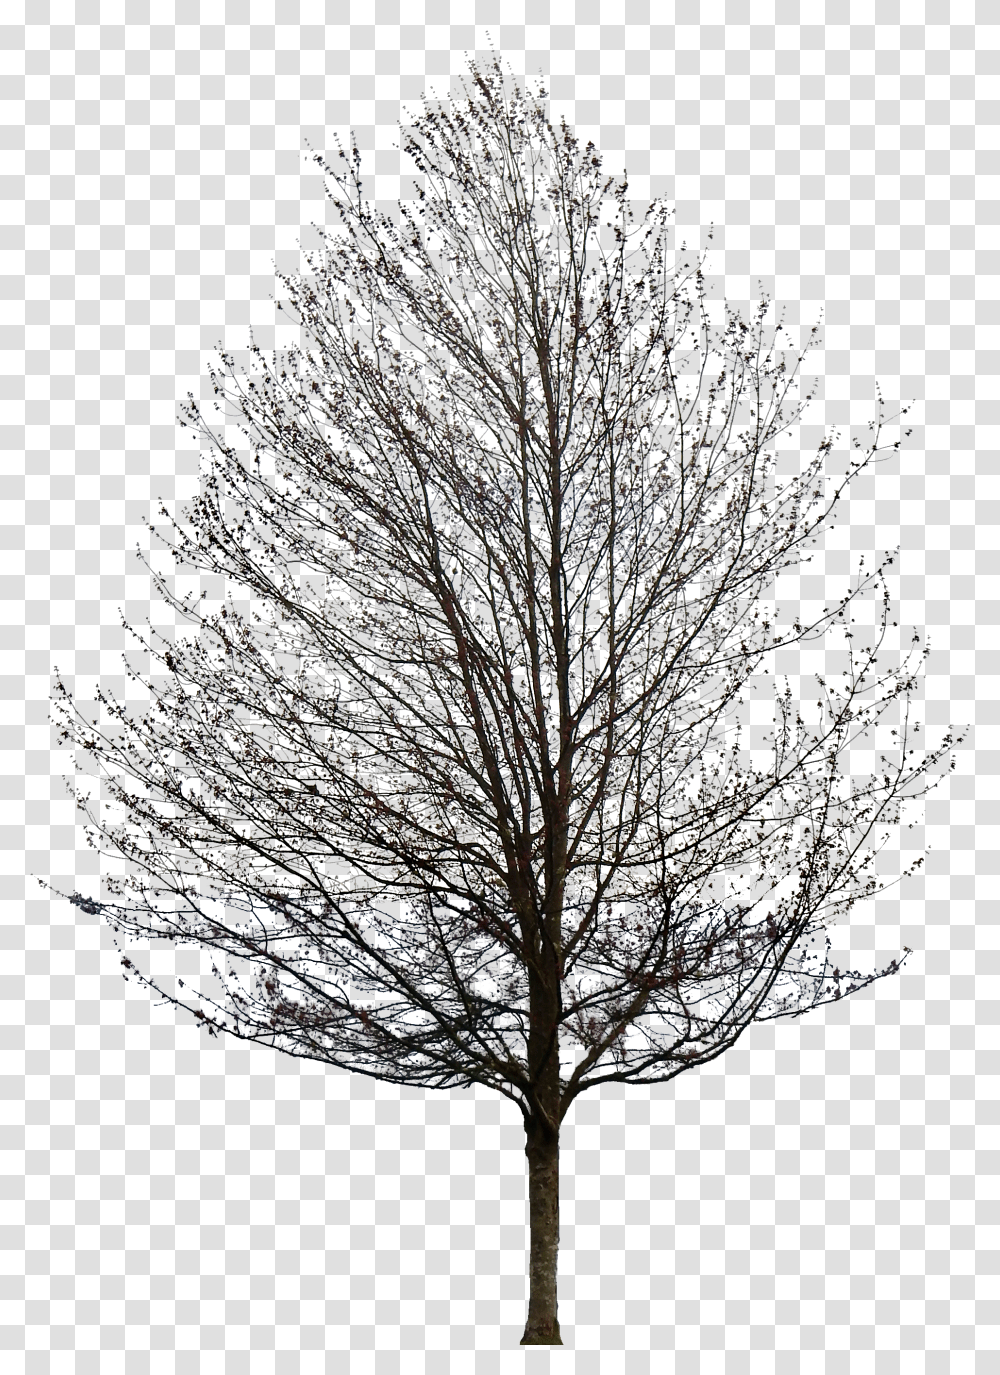 No Tree 4 Image Maple Tree No Leaves, Plant, Fir, Outdoors, Nature Transparent Png